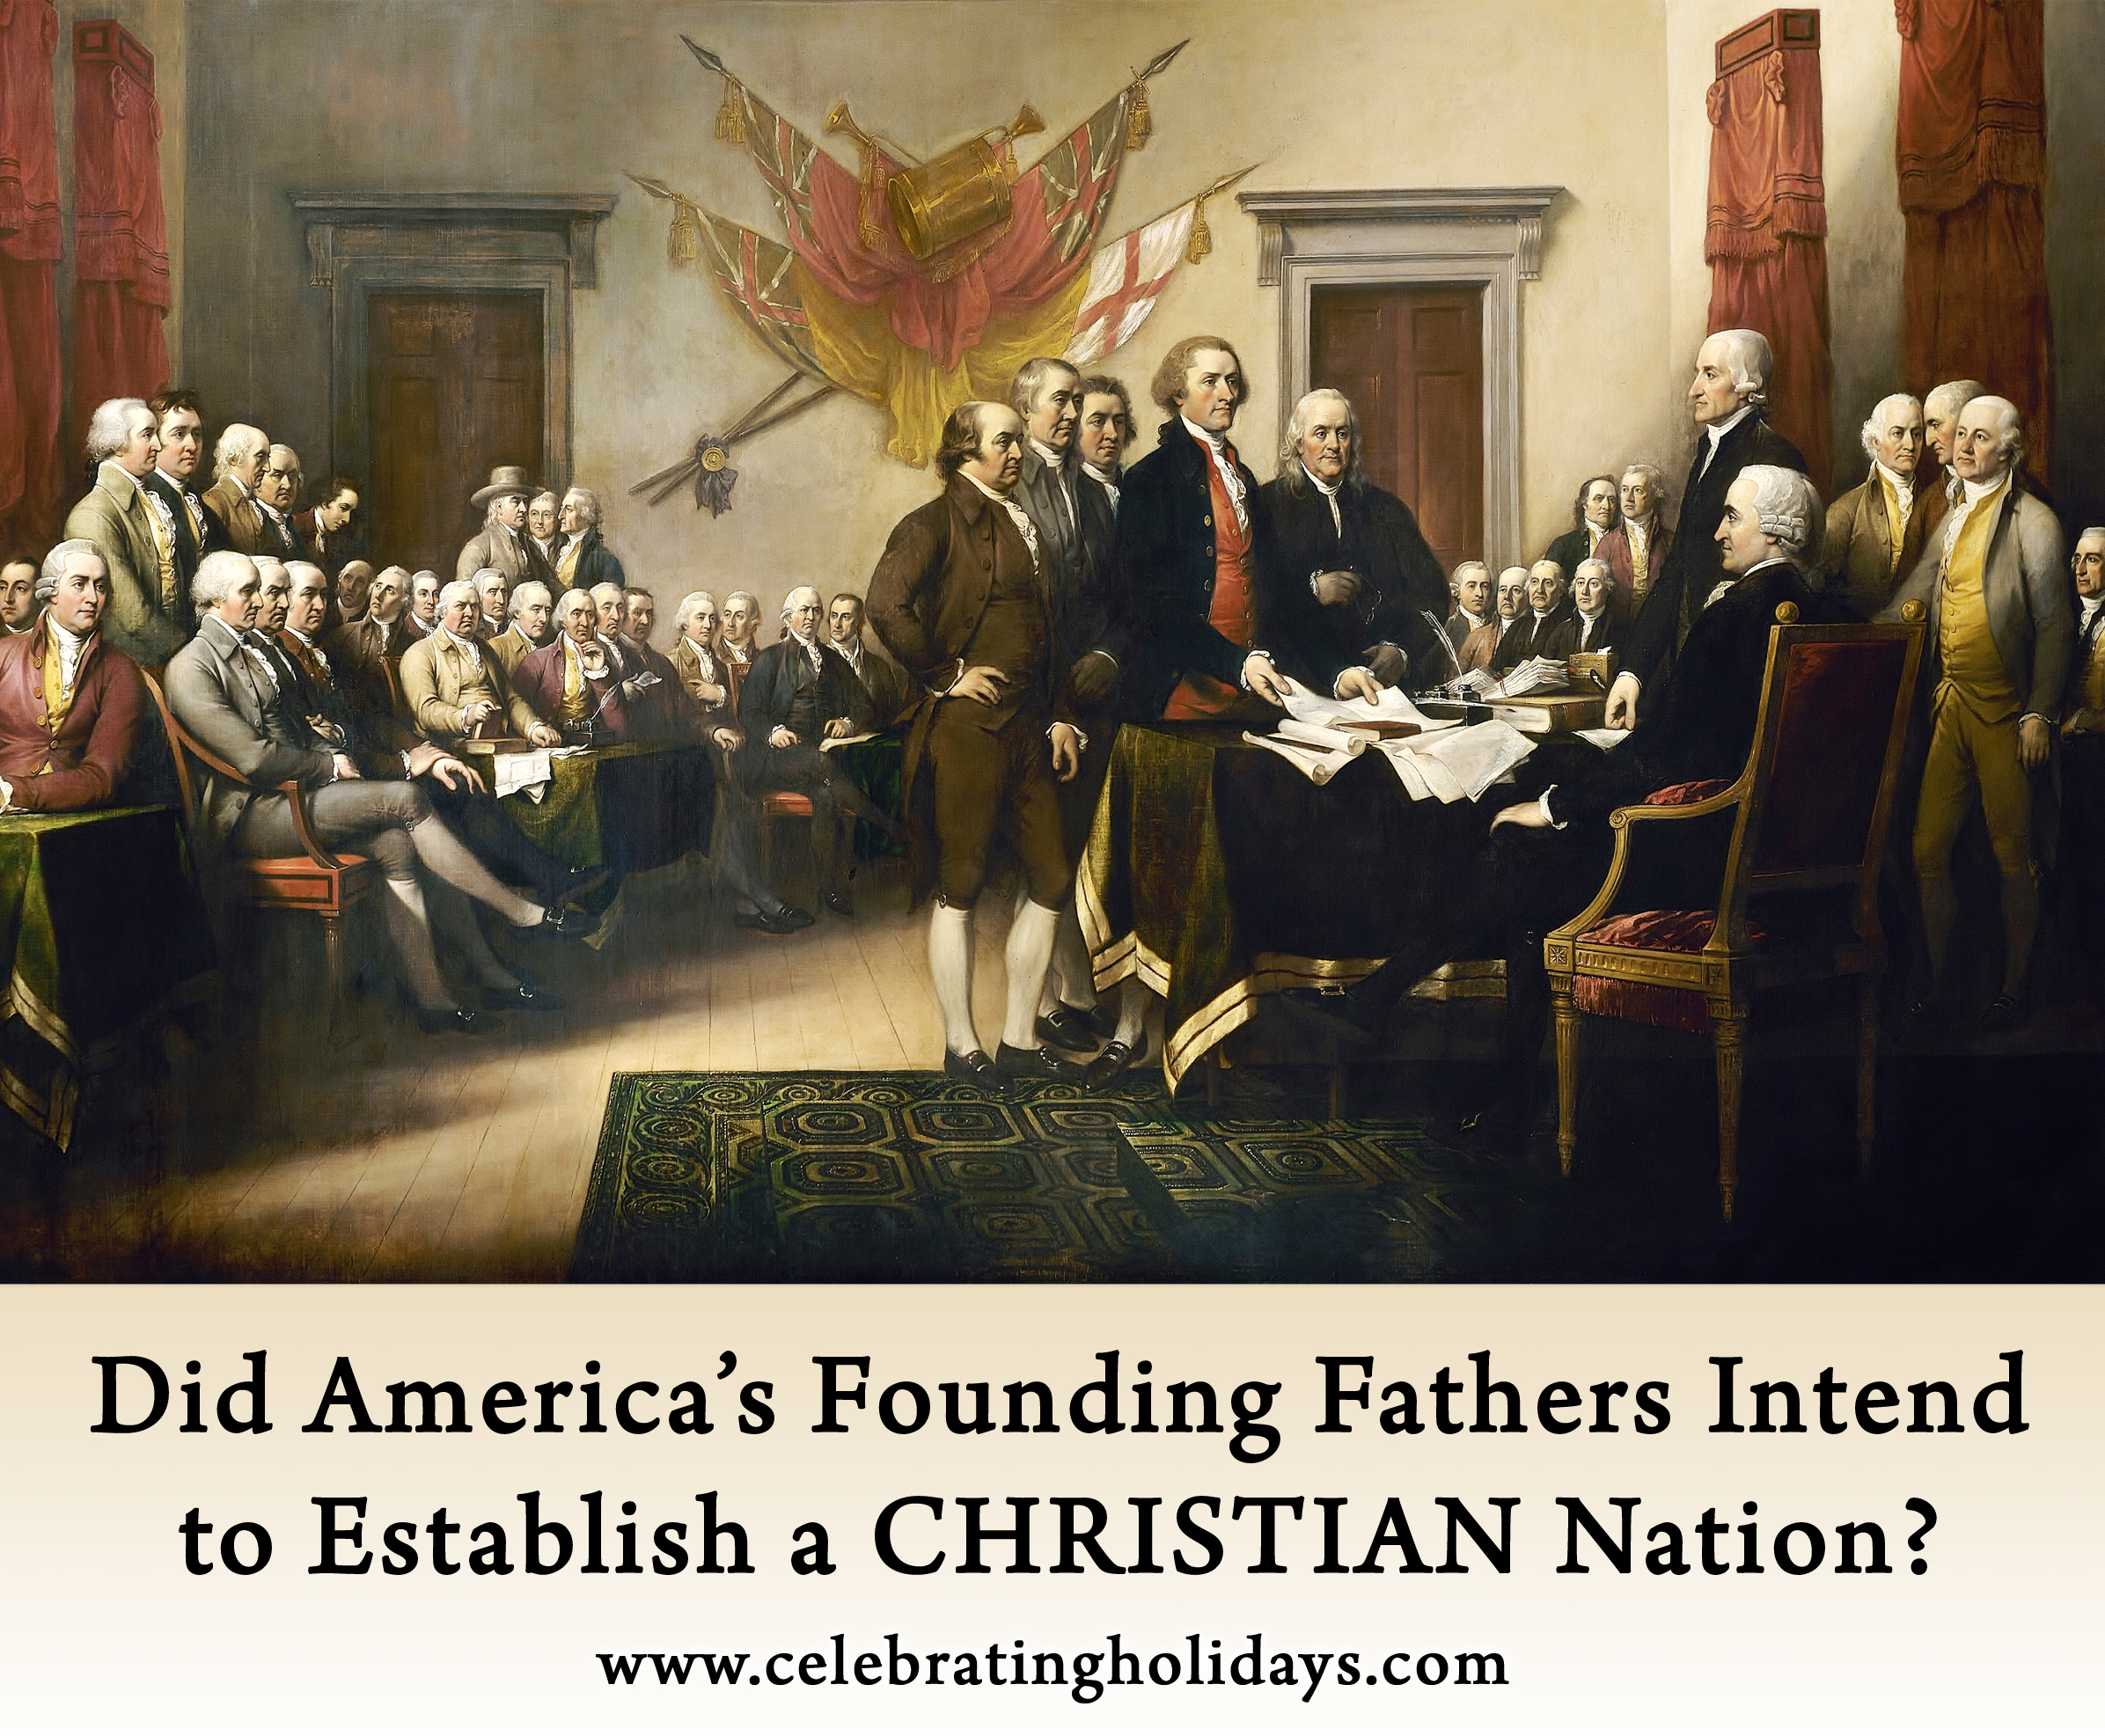 Was America Established as a Christian Nation?